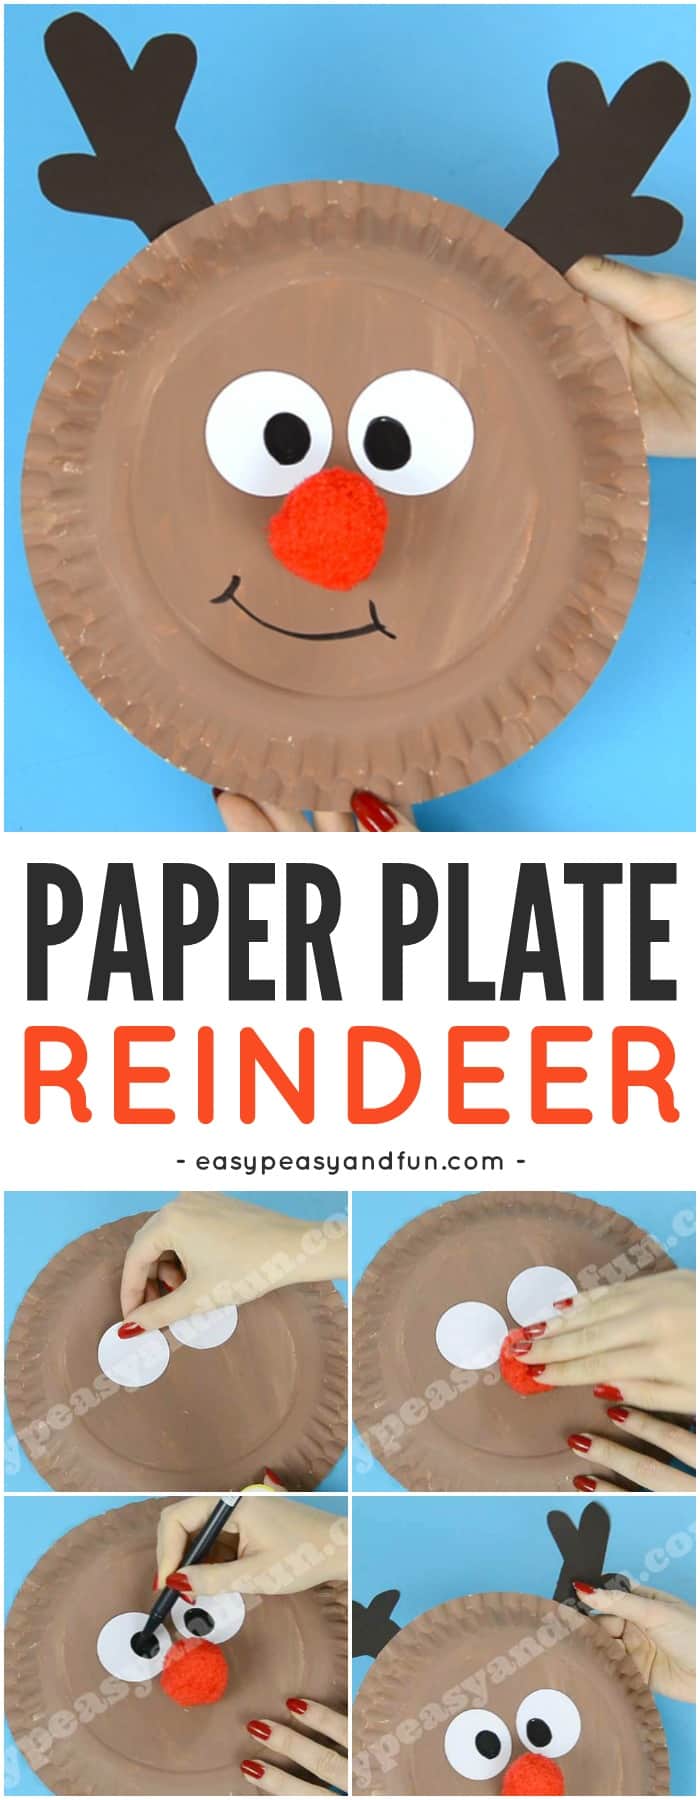 Cute Reindeer Paper Plate Craft for Kids. Fun Christmas Activity for Kids to Make. #Craftforkids #Christmascraftsforkids #Reindeercraftsforkids